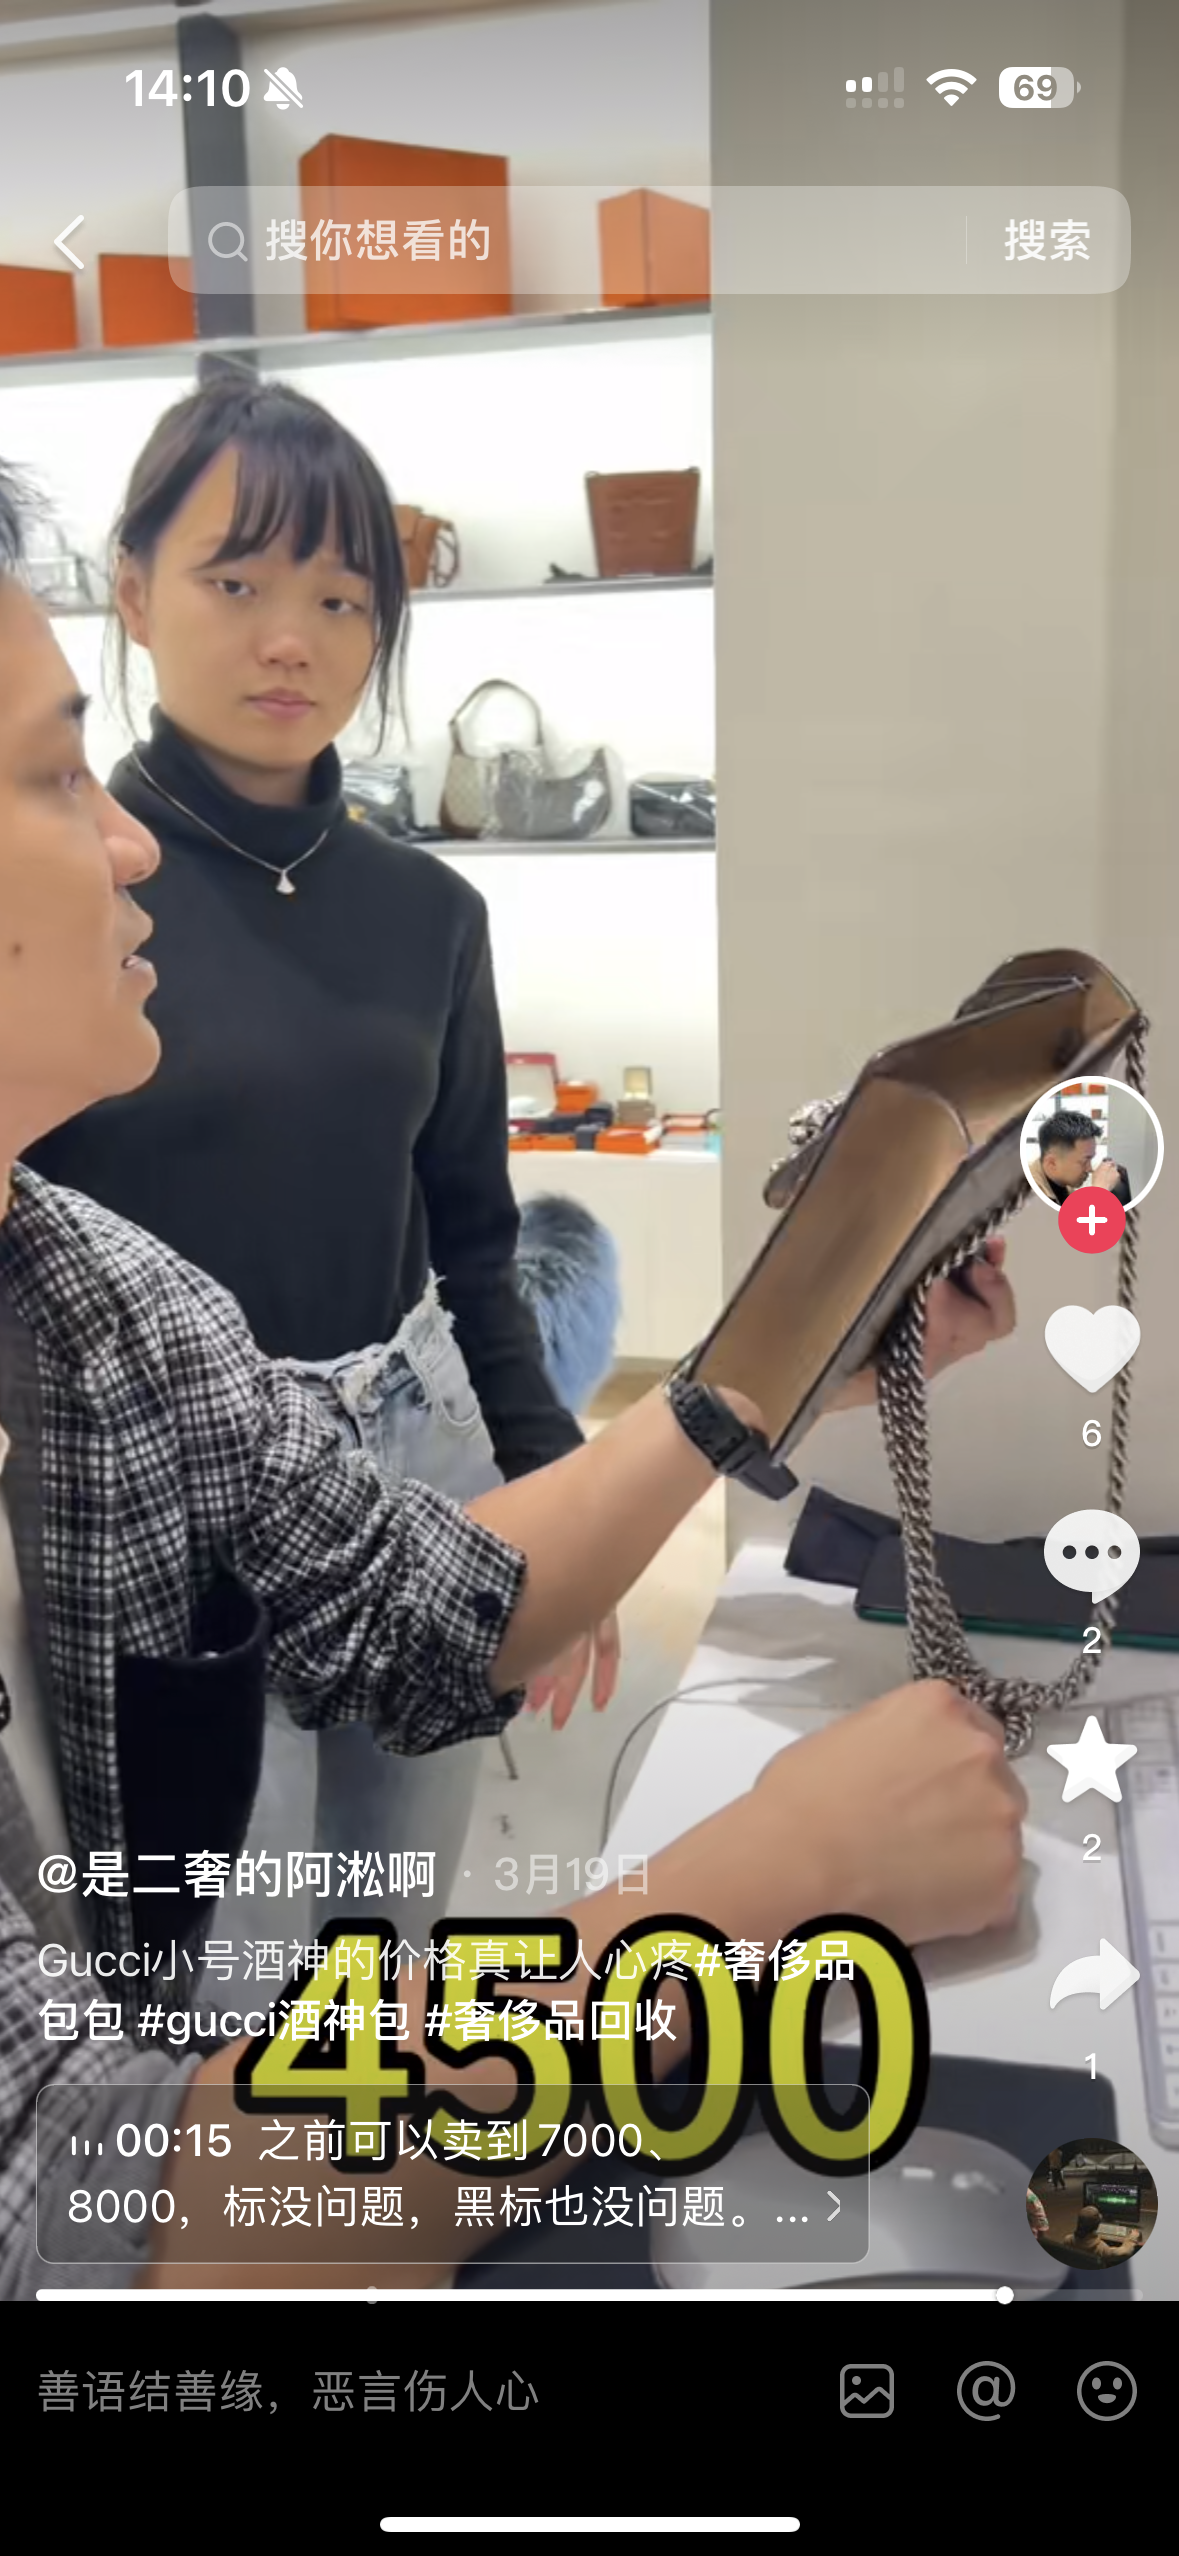 Many secondhand retailers value the small version of Gucci's Dionysus as little as $621 (4,500 RMB) versus its original price tag of $2,770 (20,000 RMB). Image: Douyin screenshot